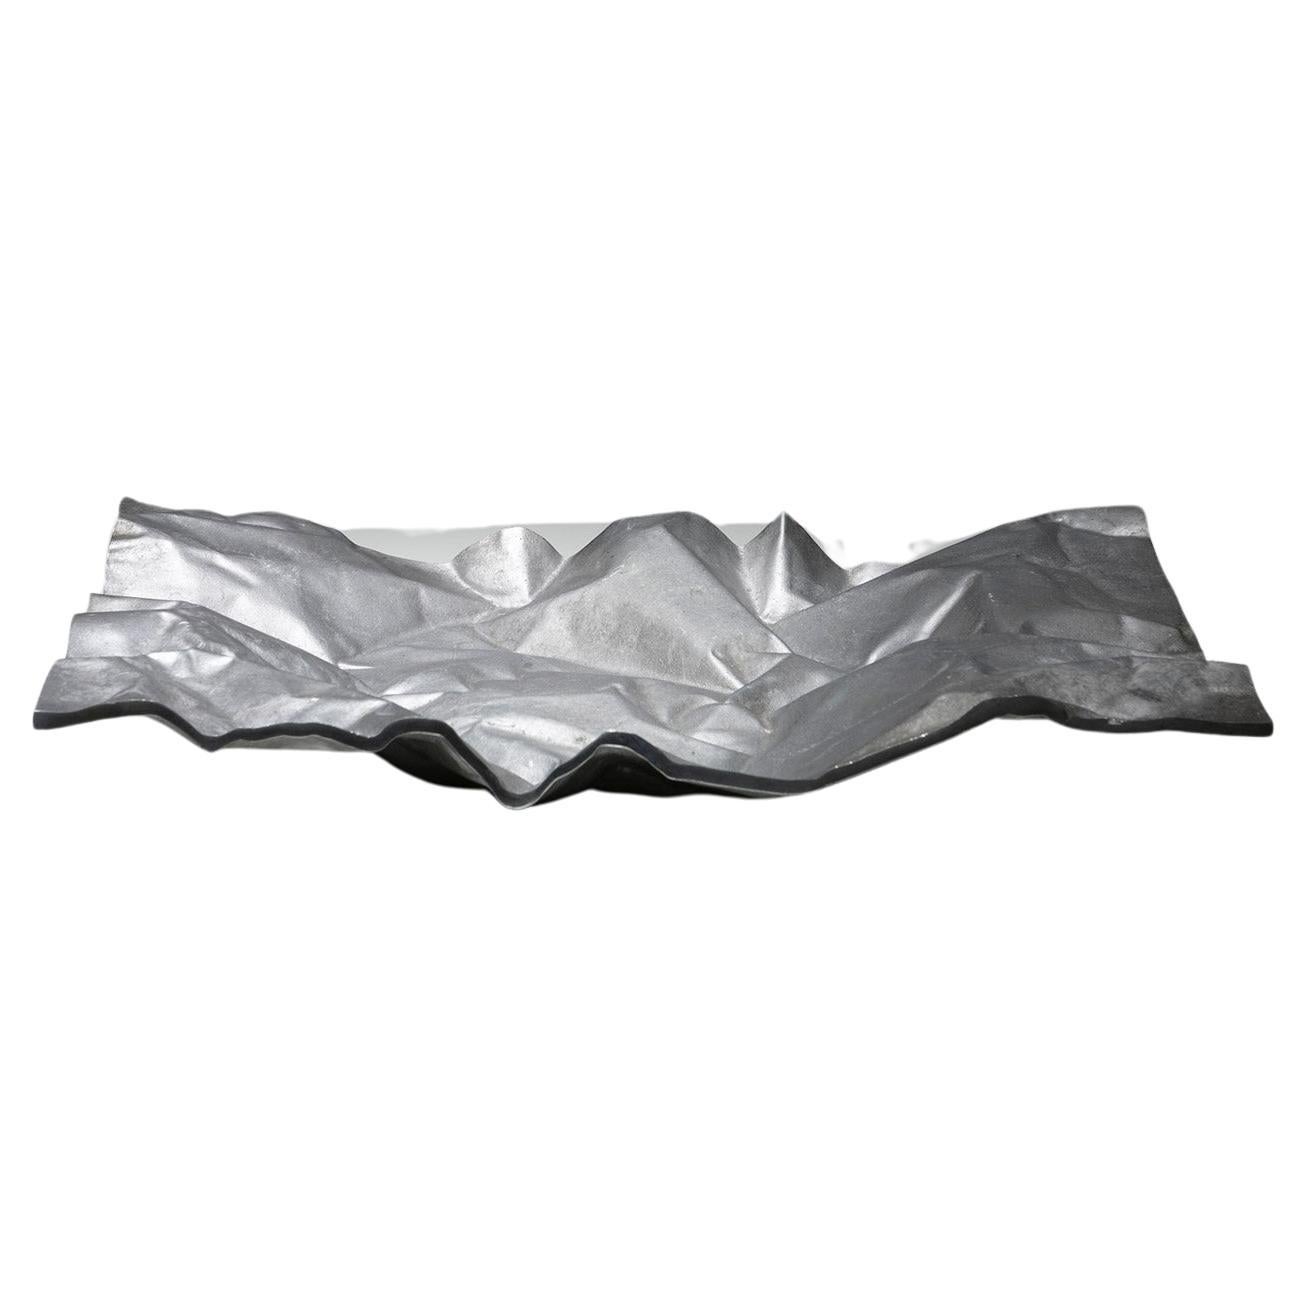 Aluminum Centerpiece Sculpture by Gruppo NP2, Nerone and Patuzzi, Italy, 1970s For Sale